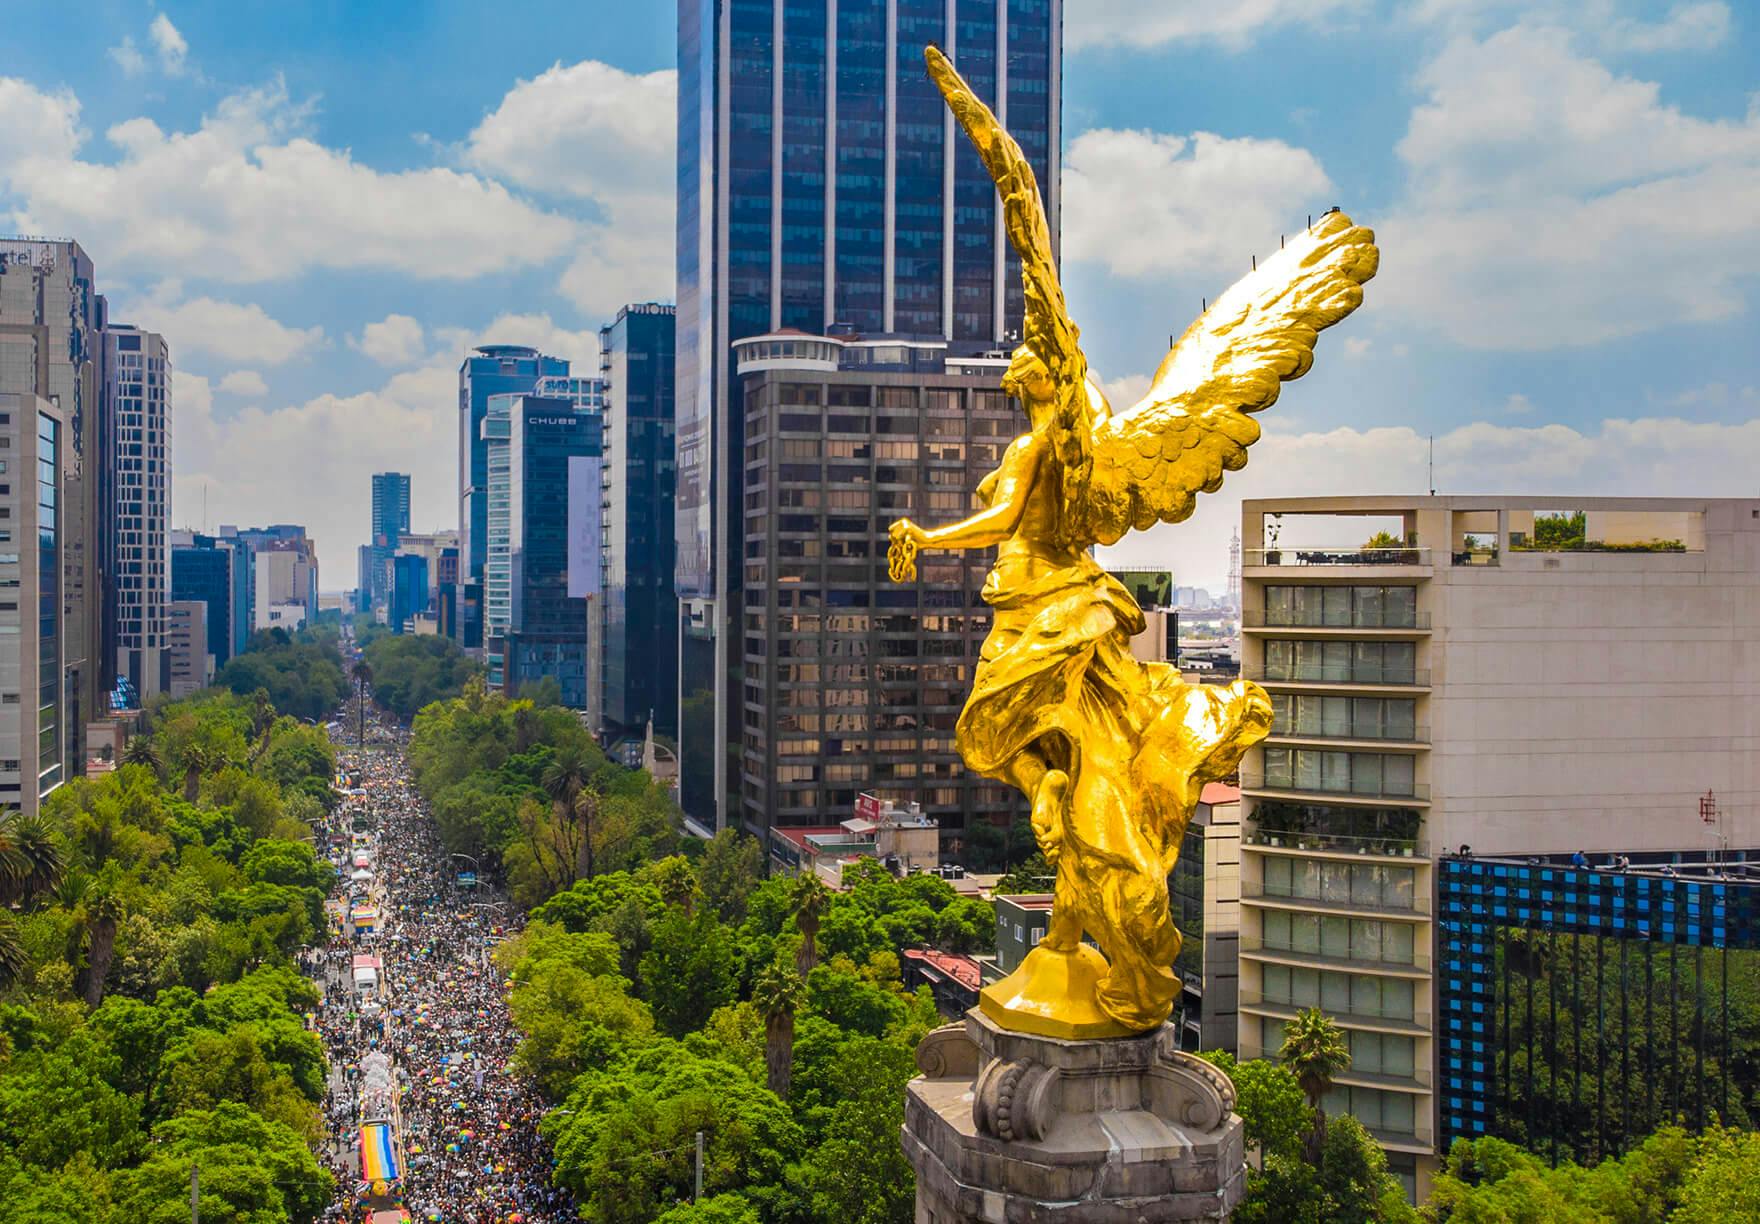 A golden statue of an angel in the middle of a city.